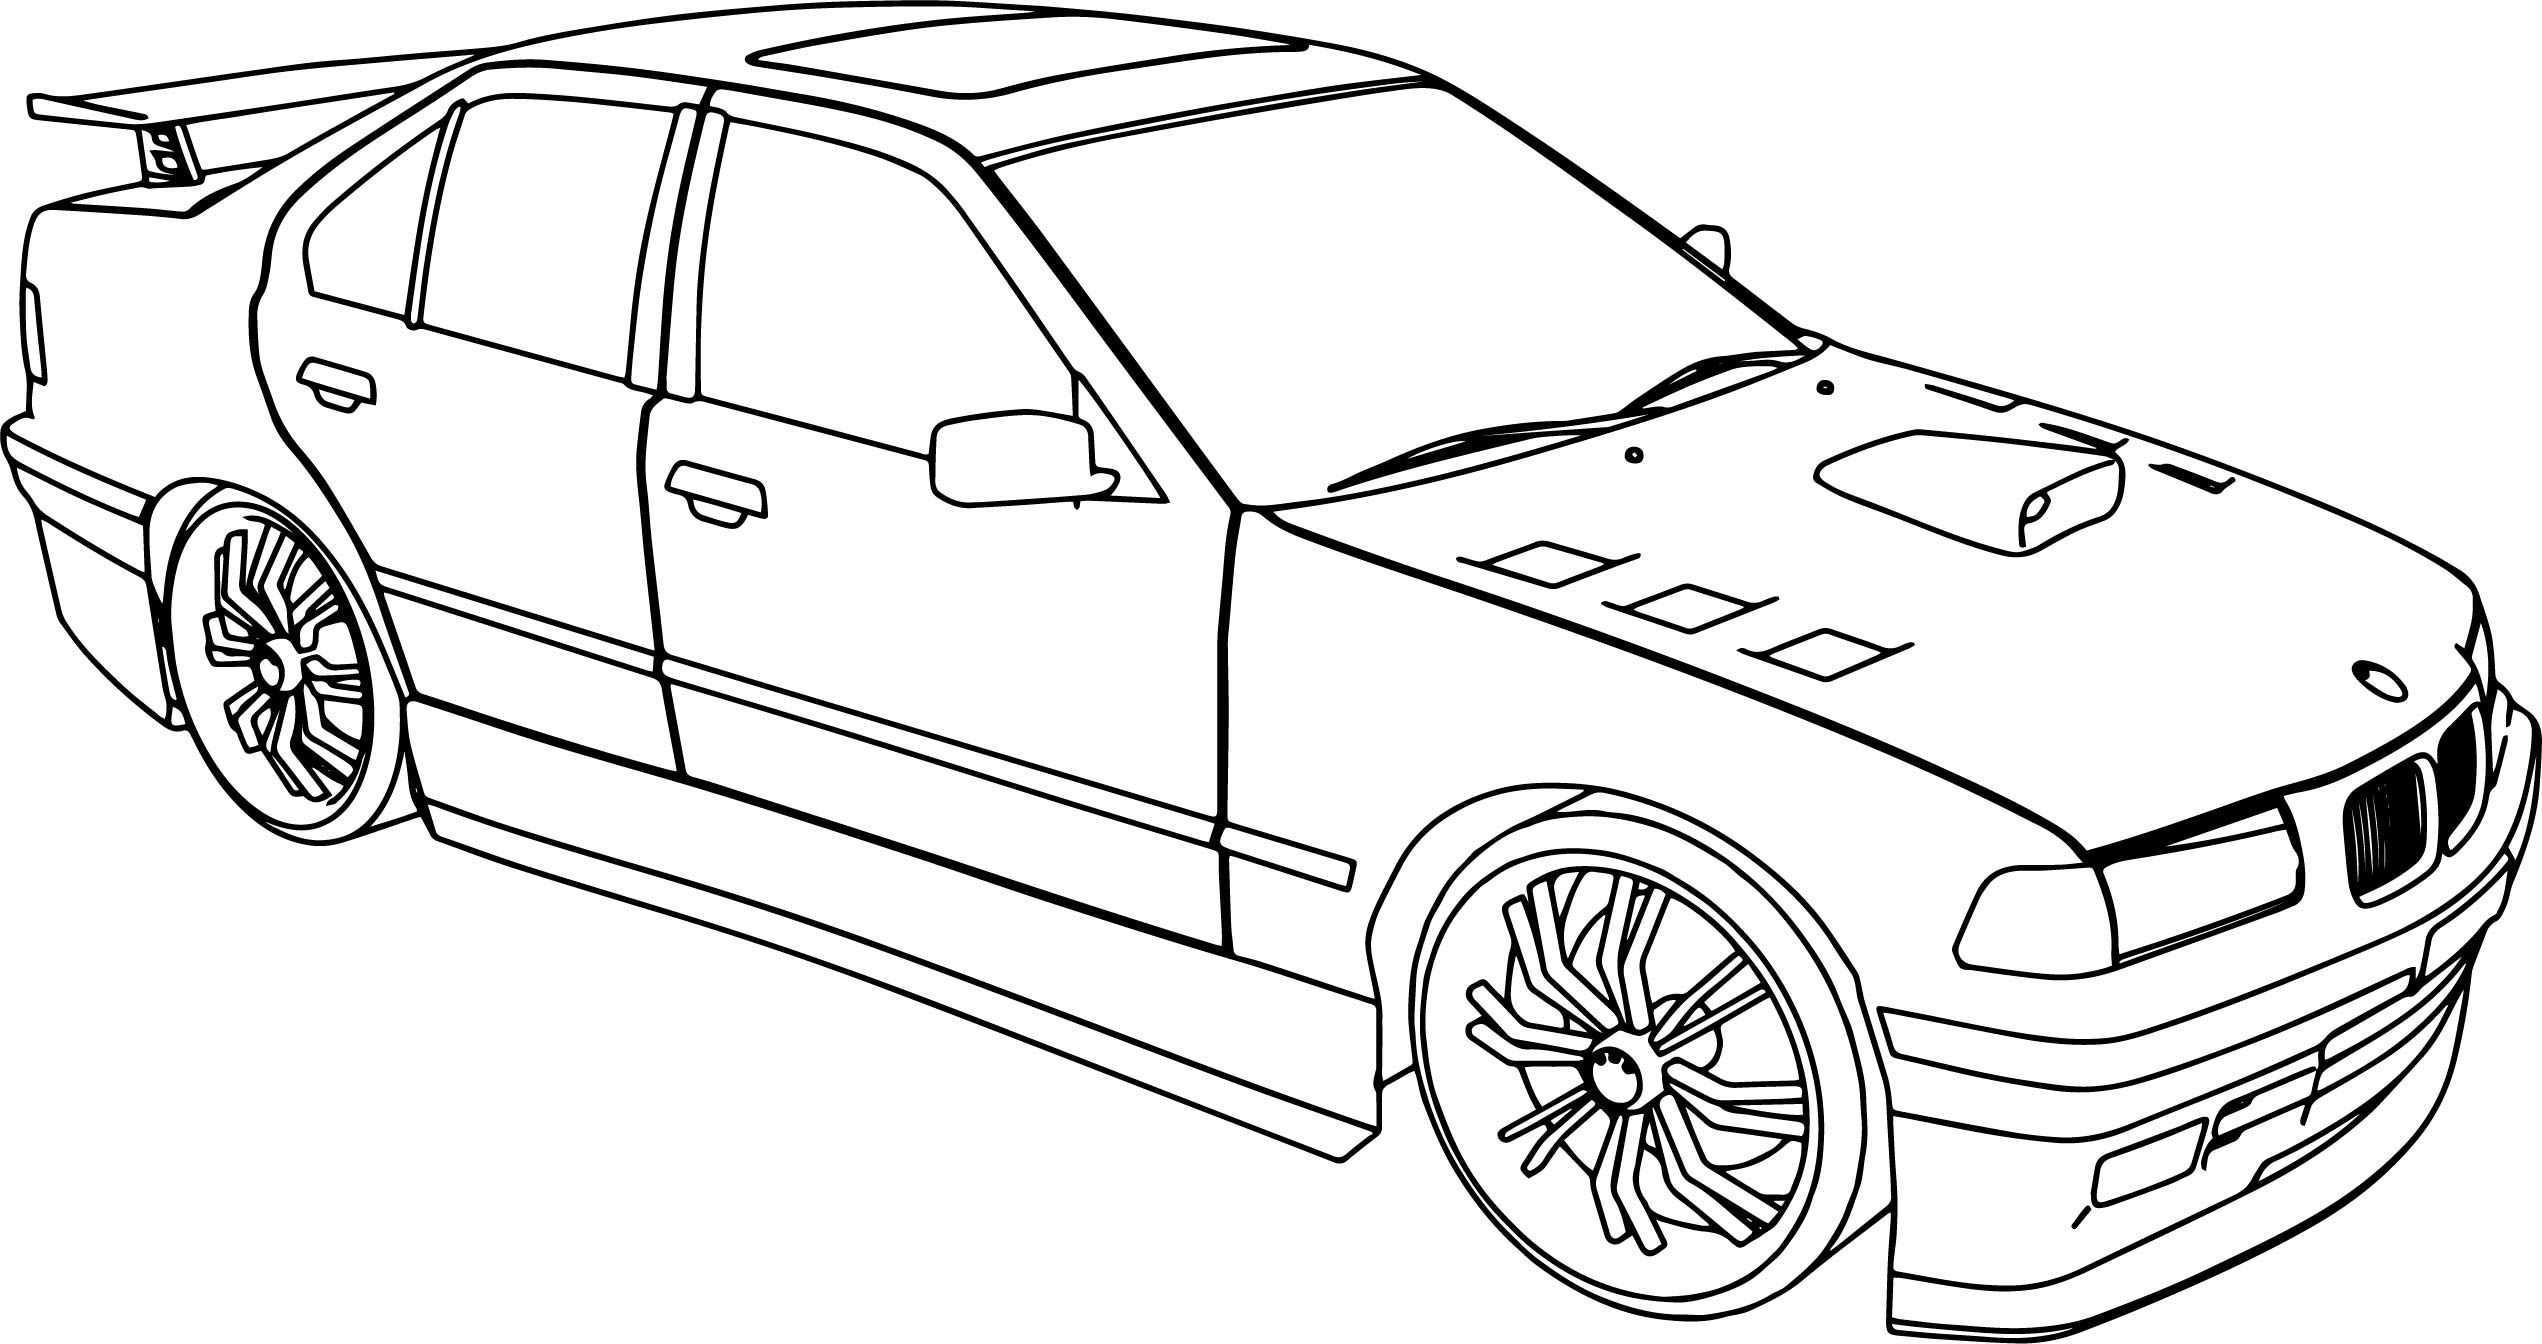 Nice Bmw 325i Tuning Sport Car Coloring Page Sports Coloring Pages Cars Coloring Pages Coloring Pages